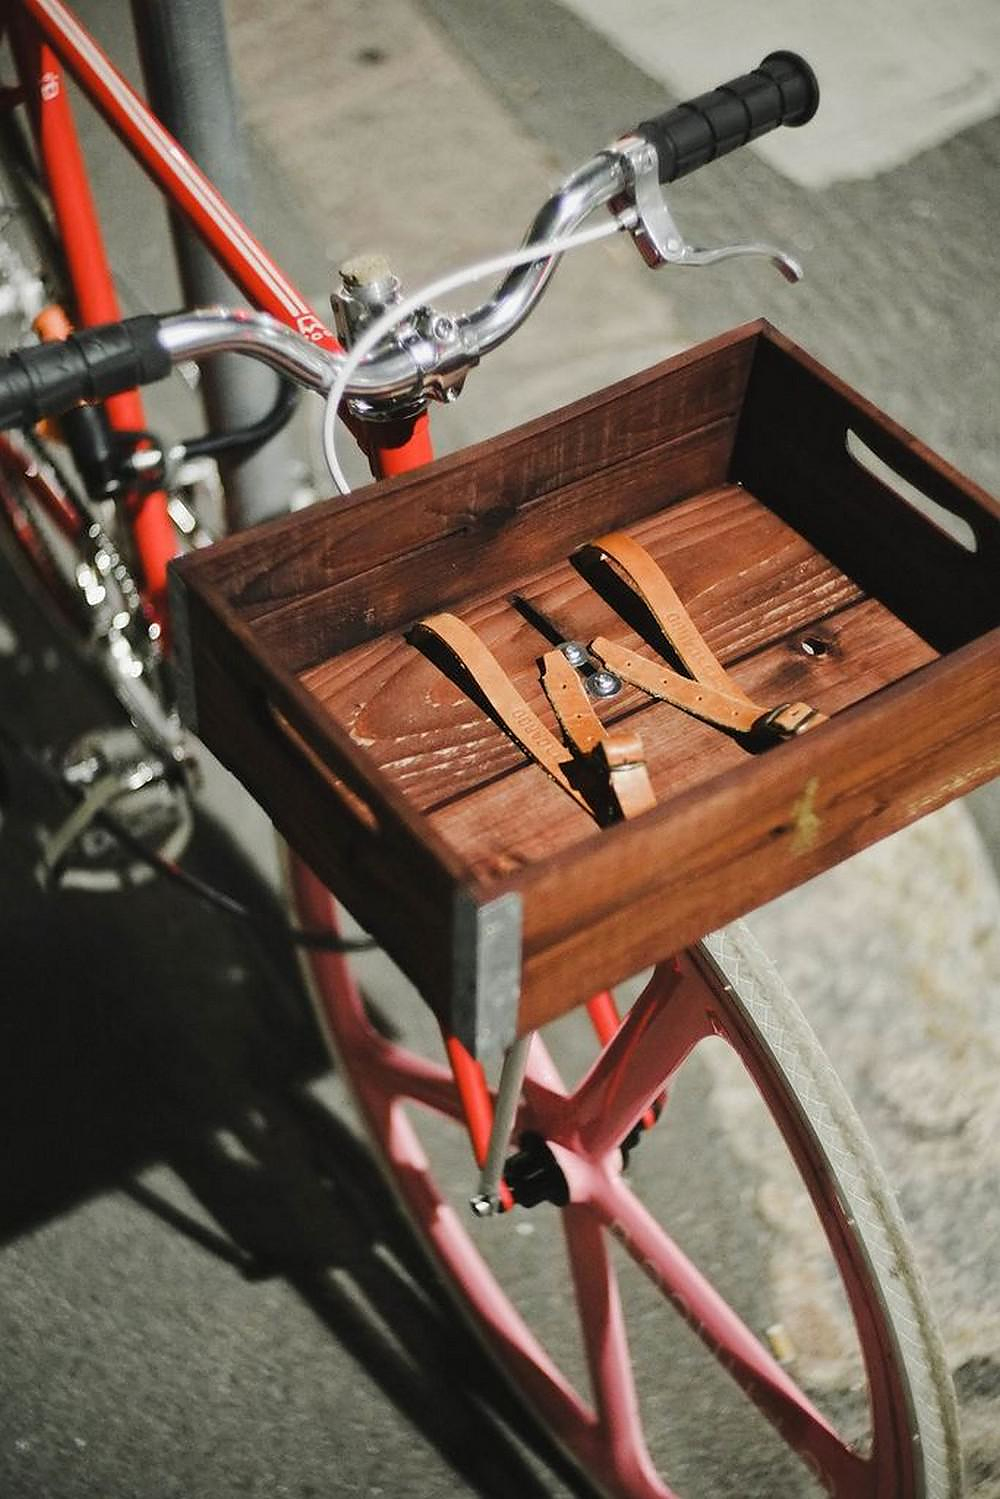 The Gothamlab bicycle basket is simply extraordinary.